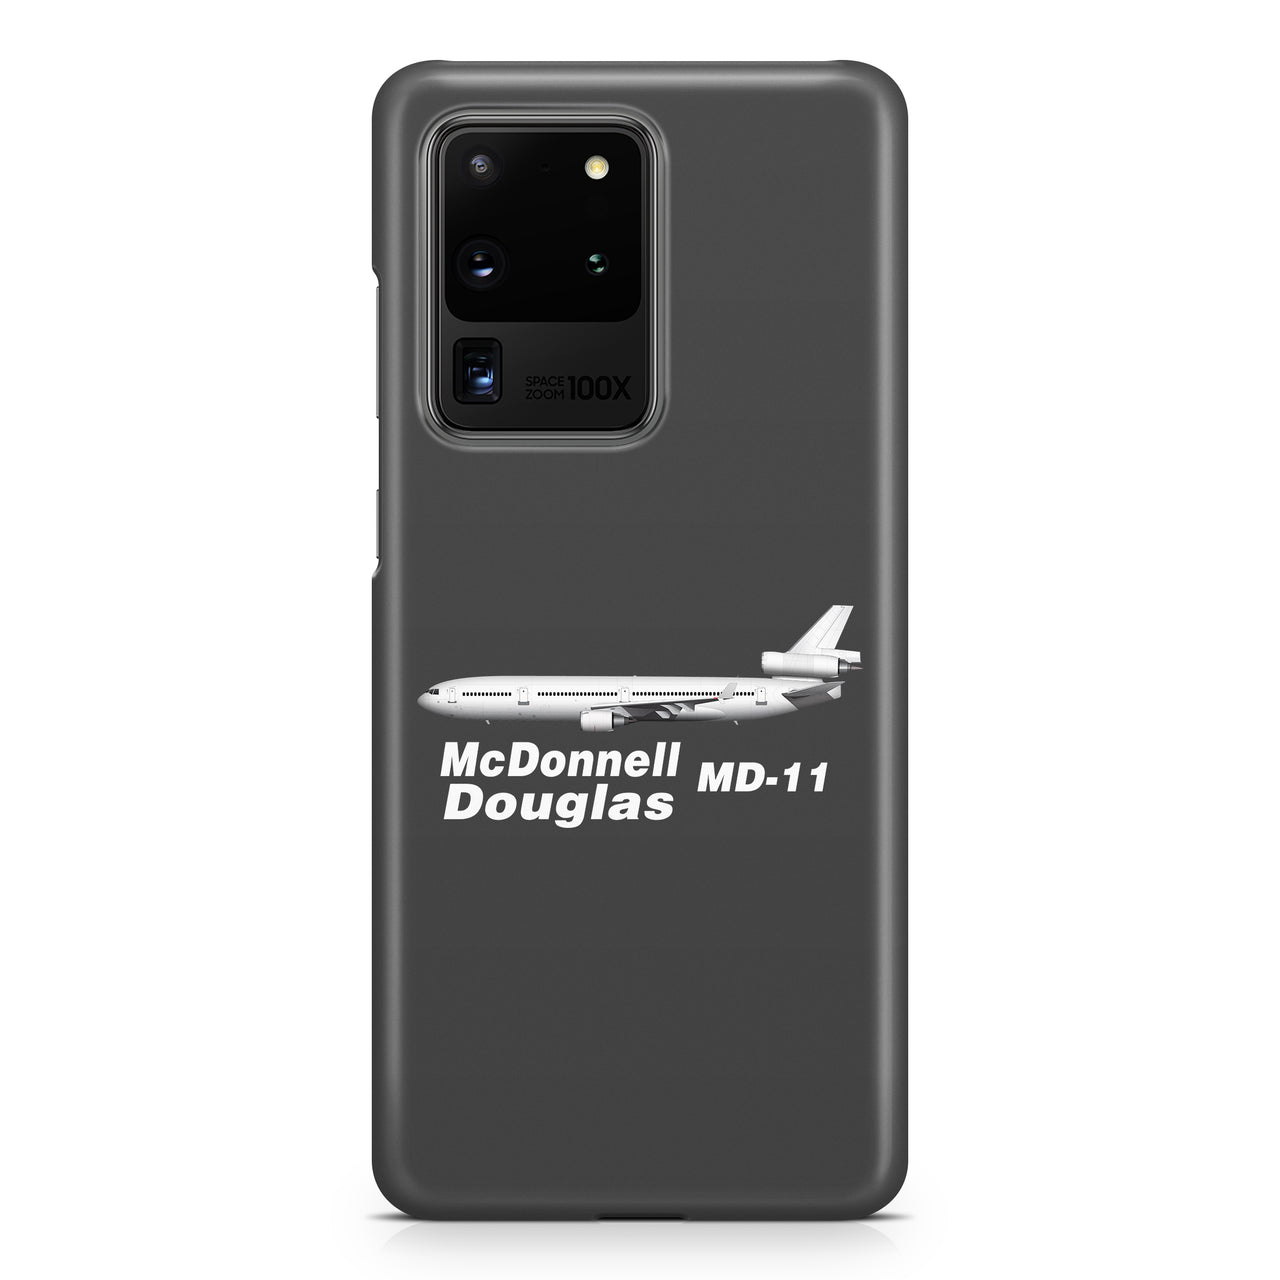 The McDonnell Douglas MD-11 Samsung A Cases